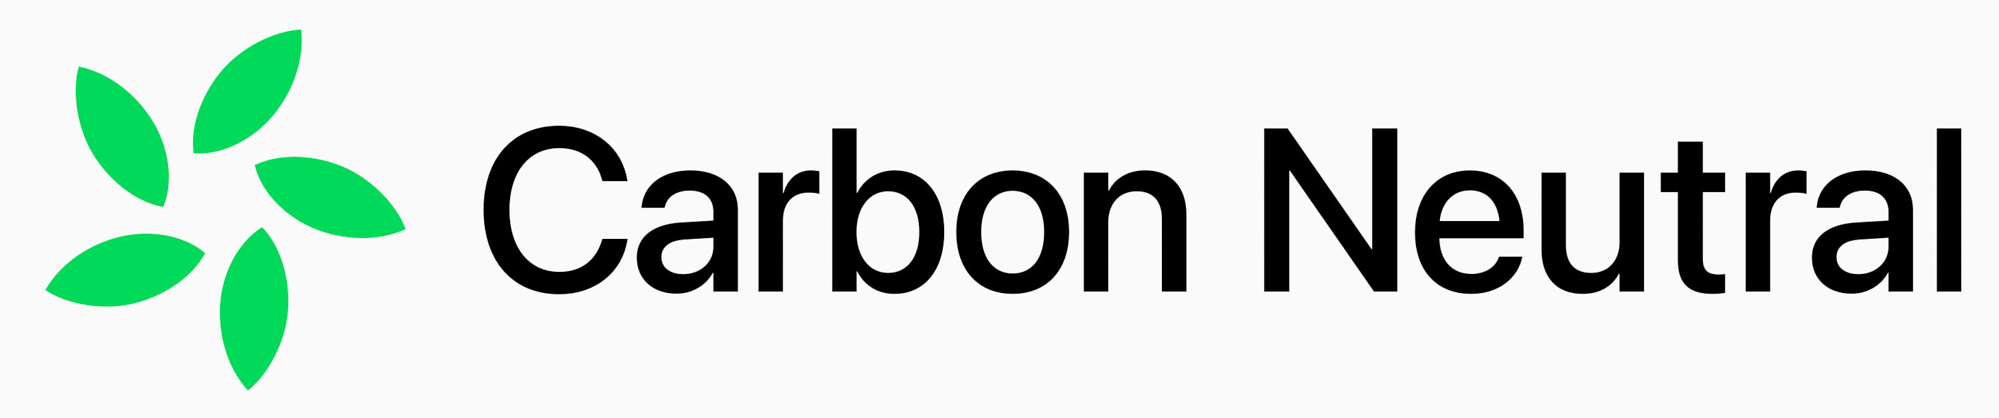 The new Apple Carbon Neutral logo.